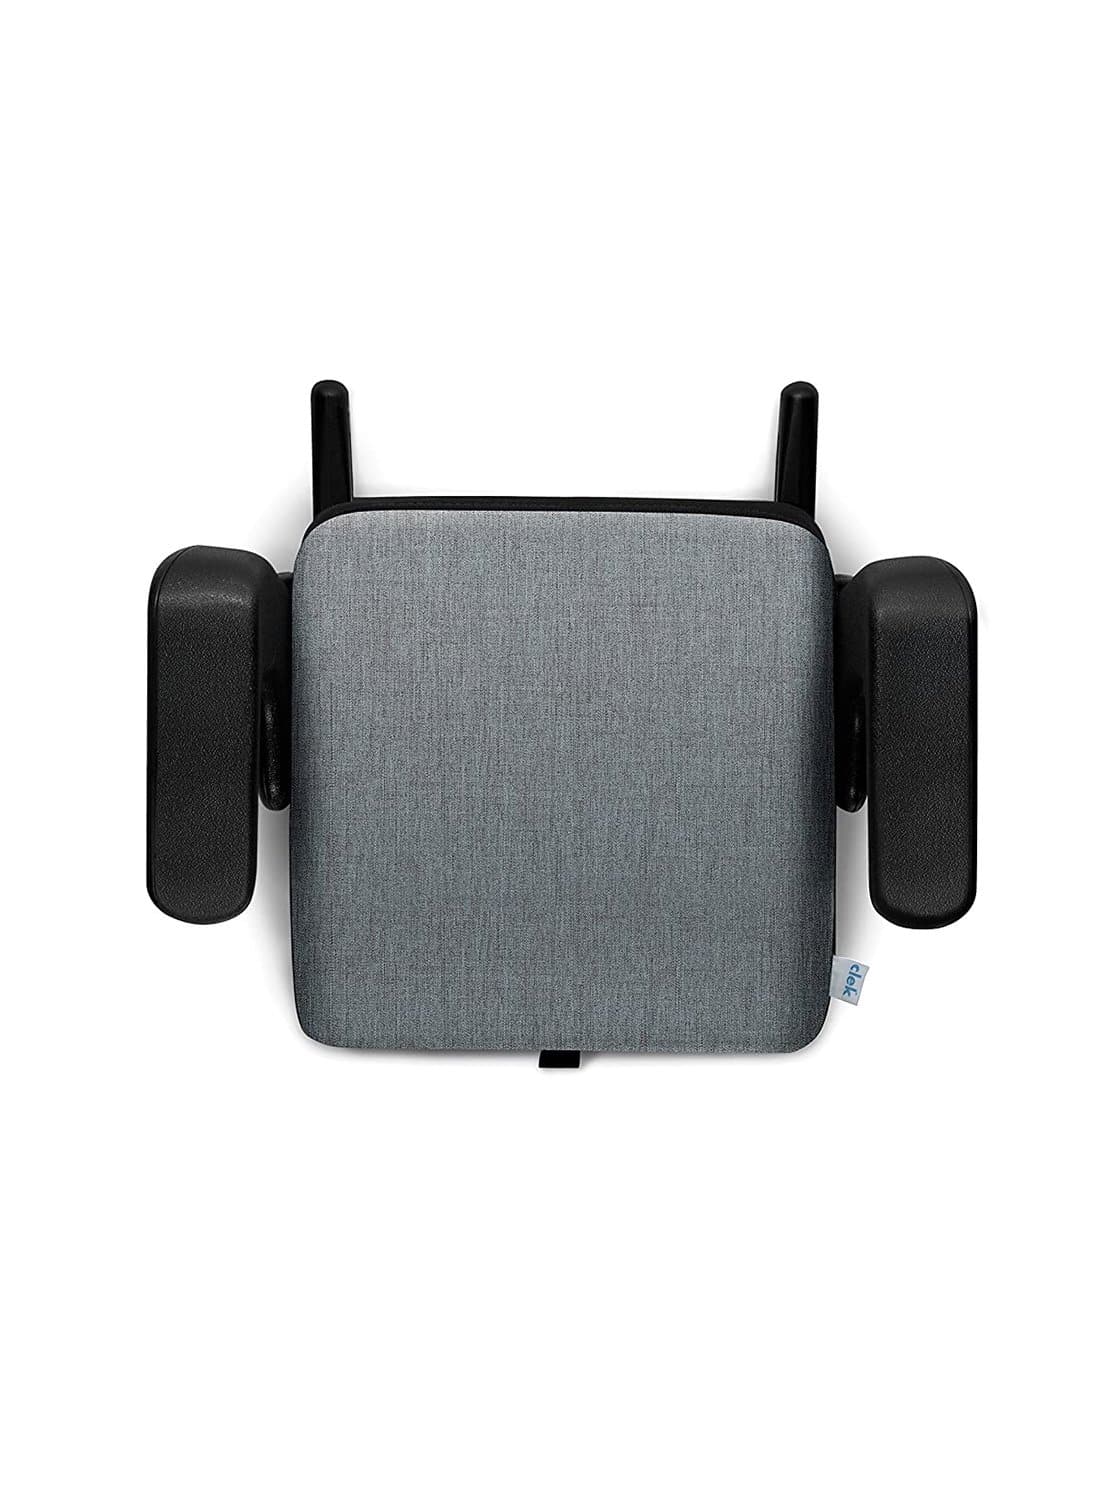 CLEK OLLI Backless Booster Seat - ANB Baby -$100 - $300